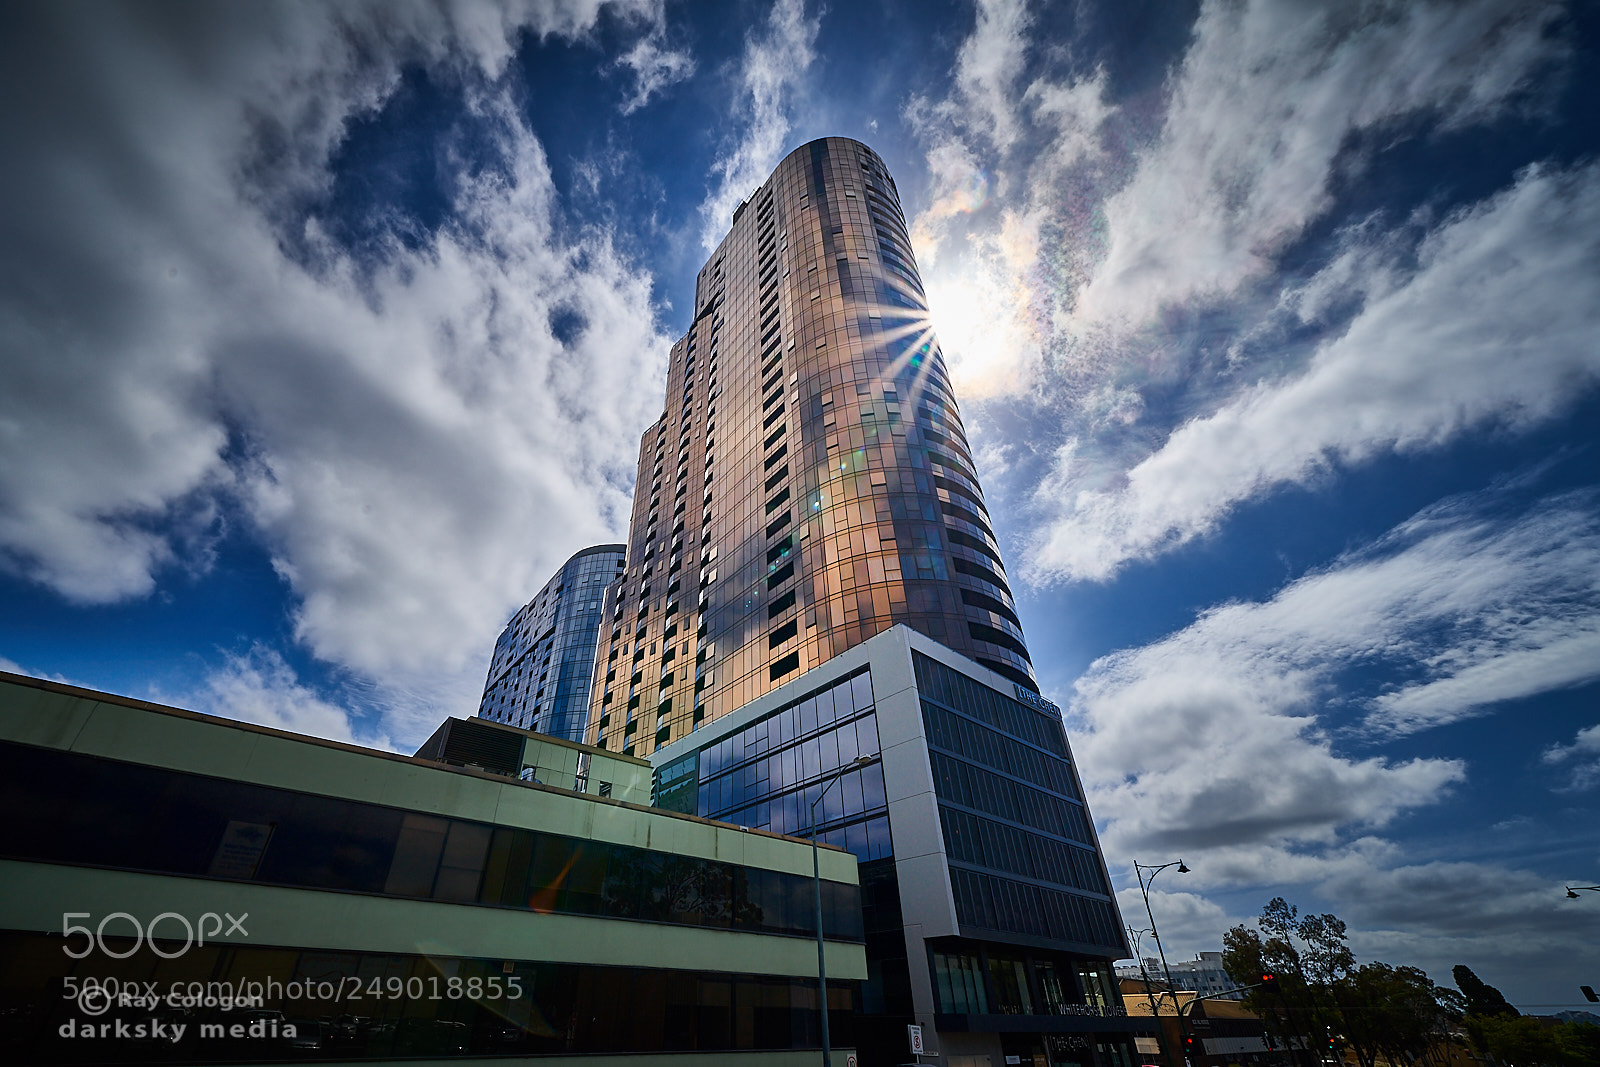 Sony a7R III sample photo. Whitehorse towers photography